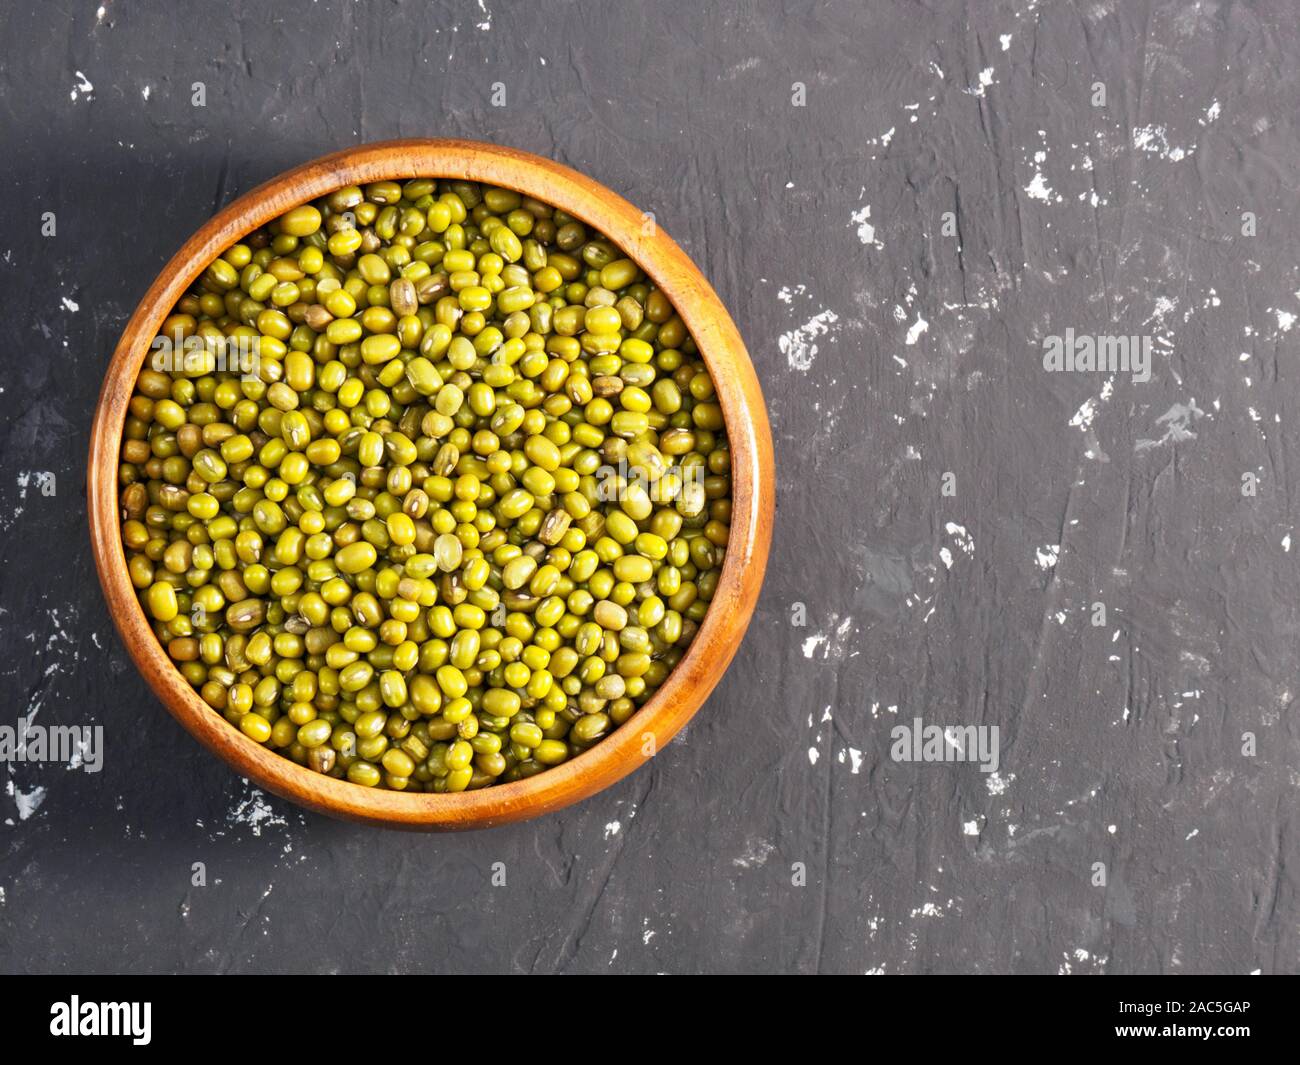 Green gram on a black concrete background. Indian cuisine ingredients Stock Photo